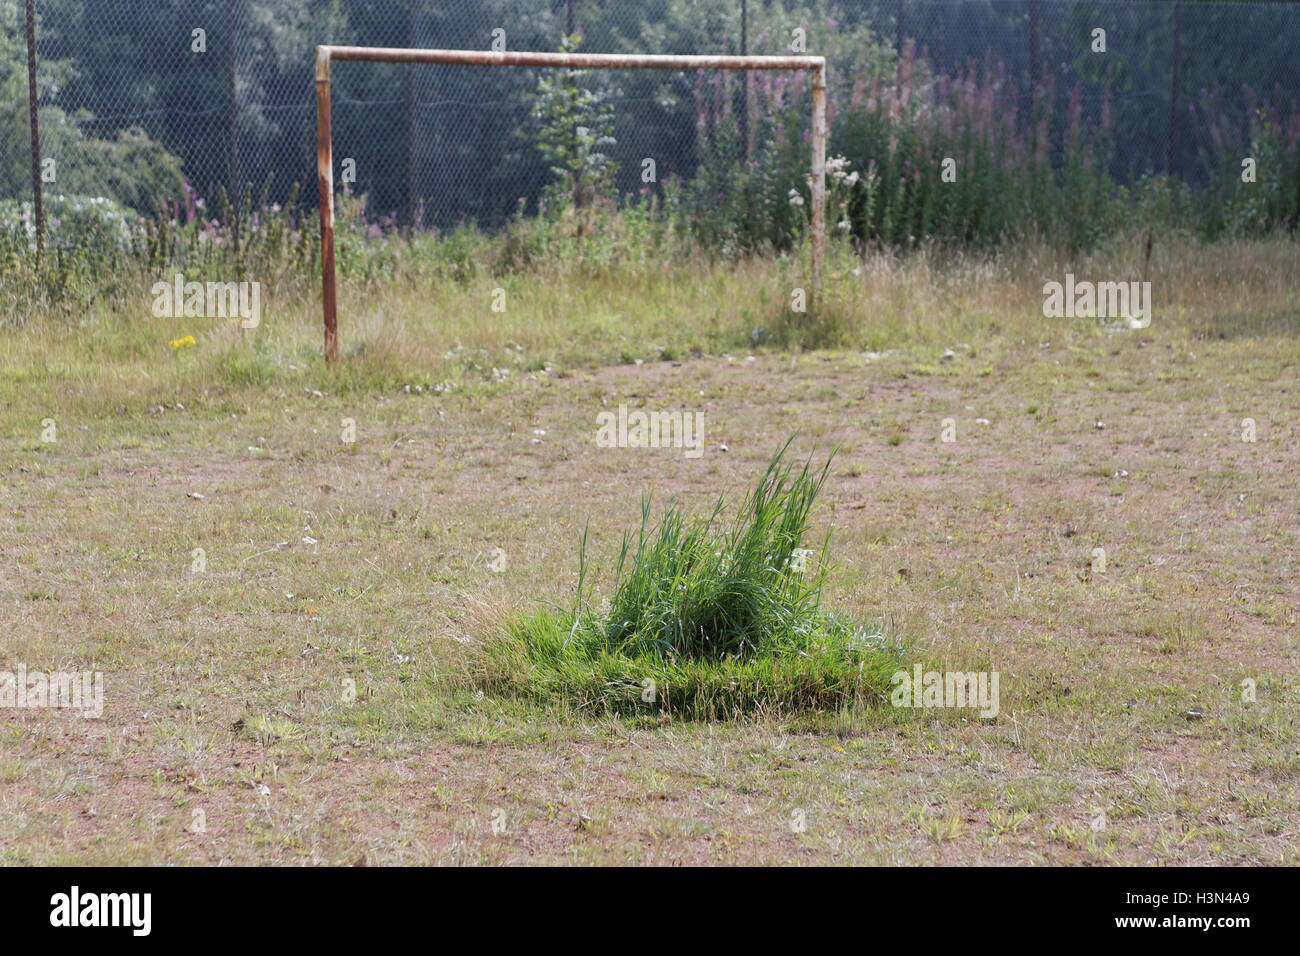 dead football or soccer pitch run down dilapidated and overgrown pitch symbolic grass field goal posts Stock Photo